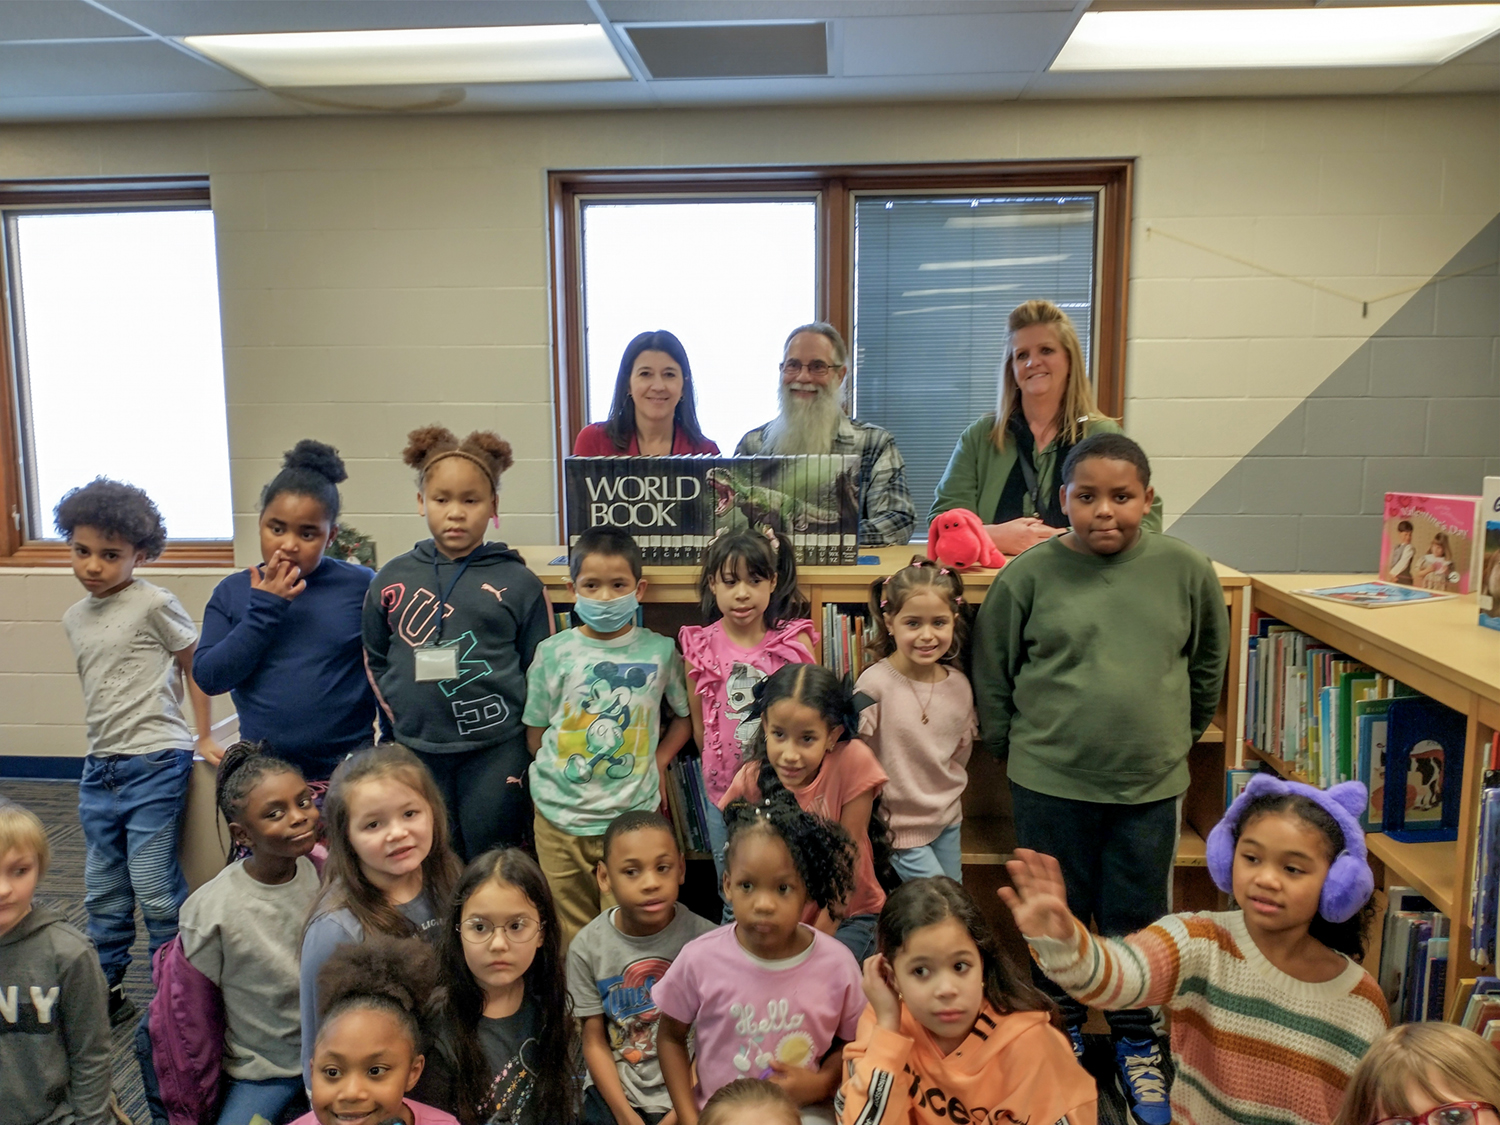 When the Friends of the Lorain Public Library heard that the Jacinto school library had flooded, destroying many of their books, they donated a set of encyclopedias to help replenish their collection.